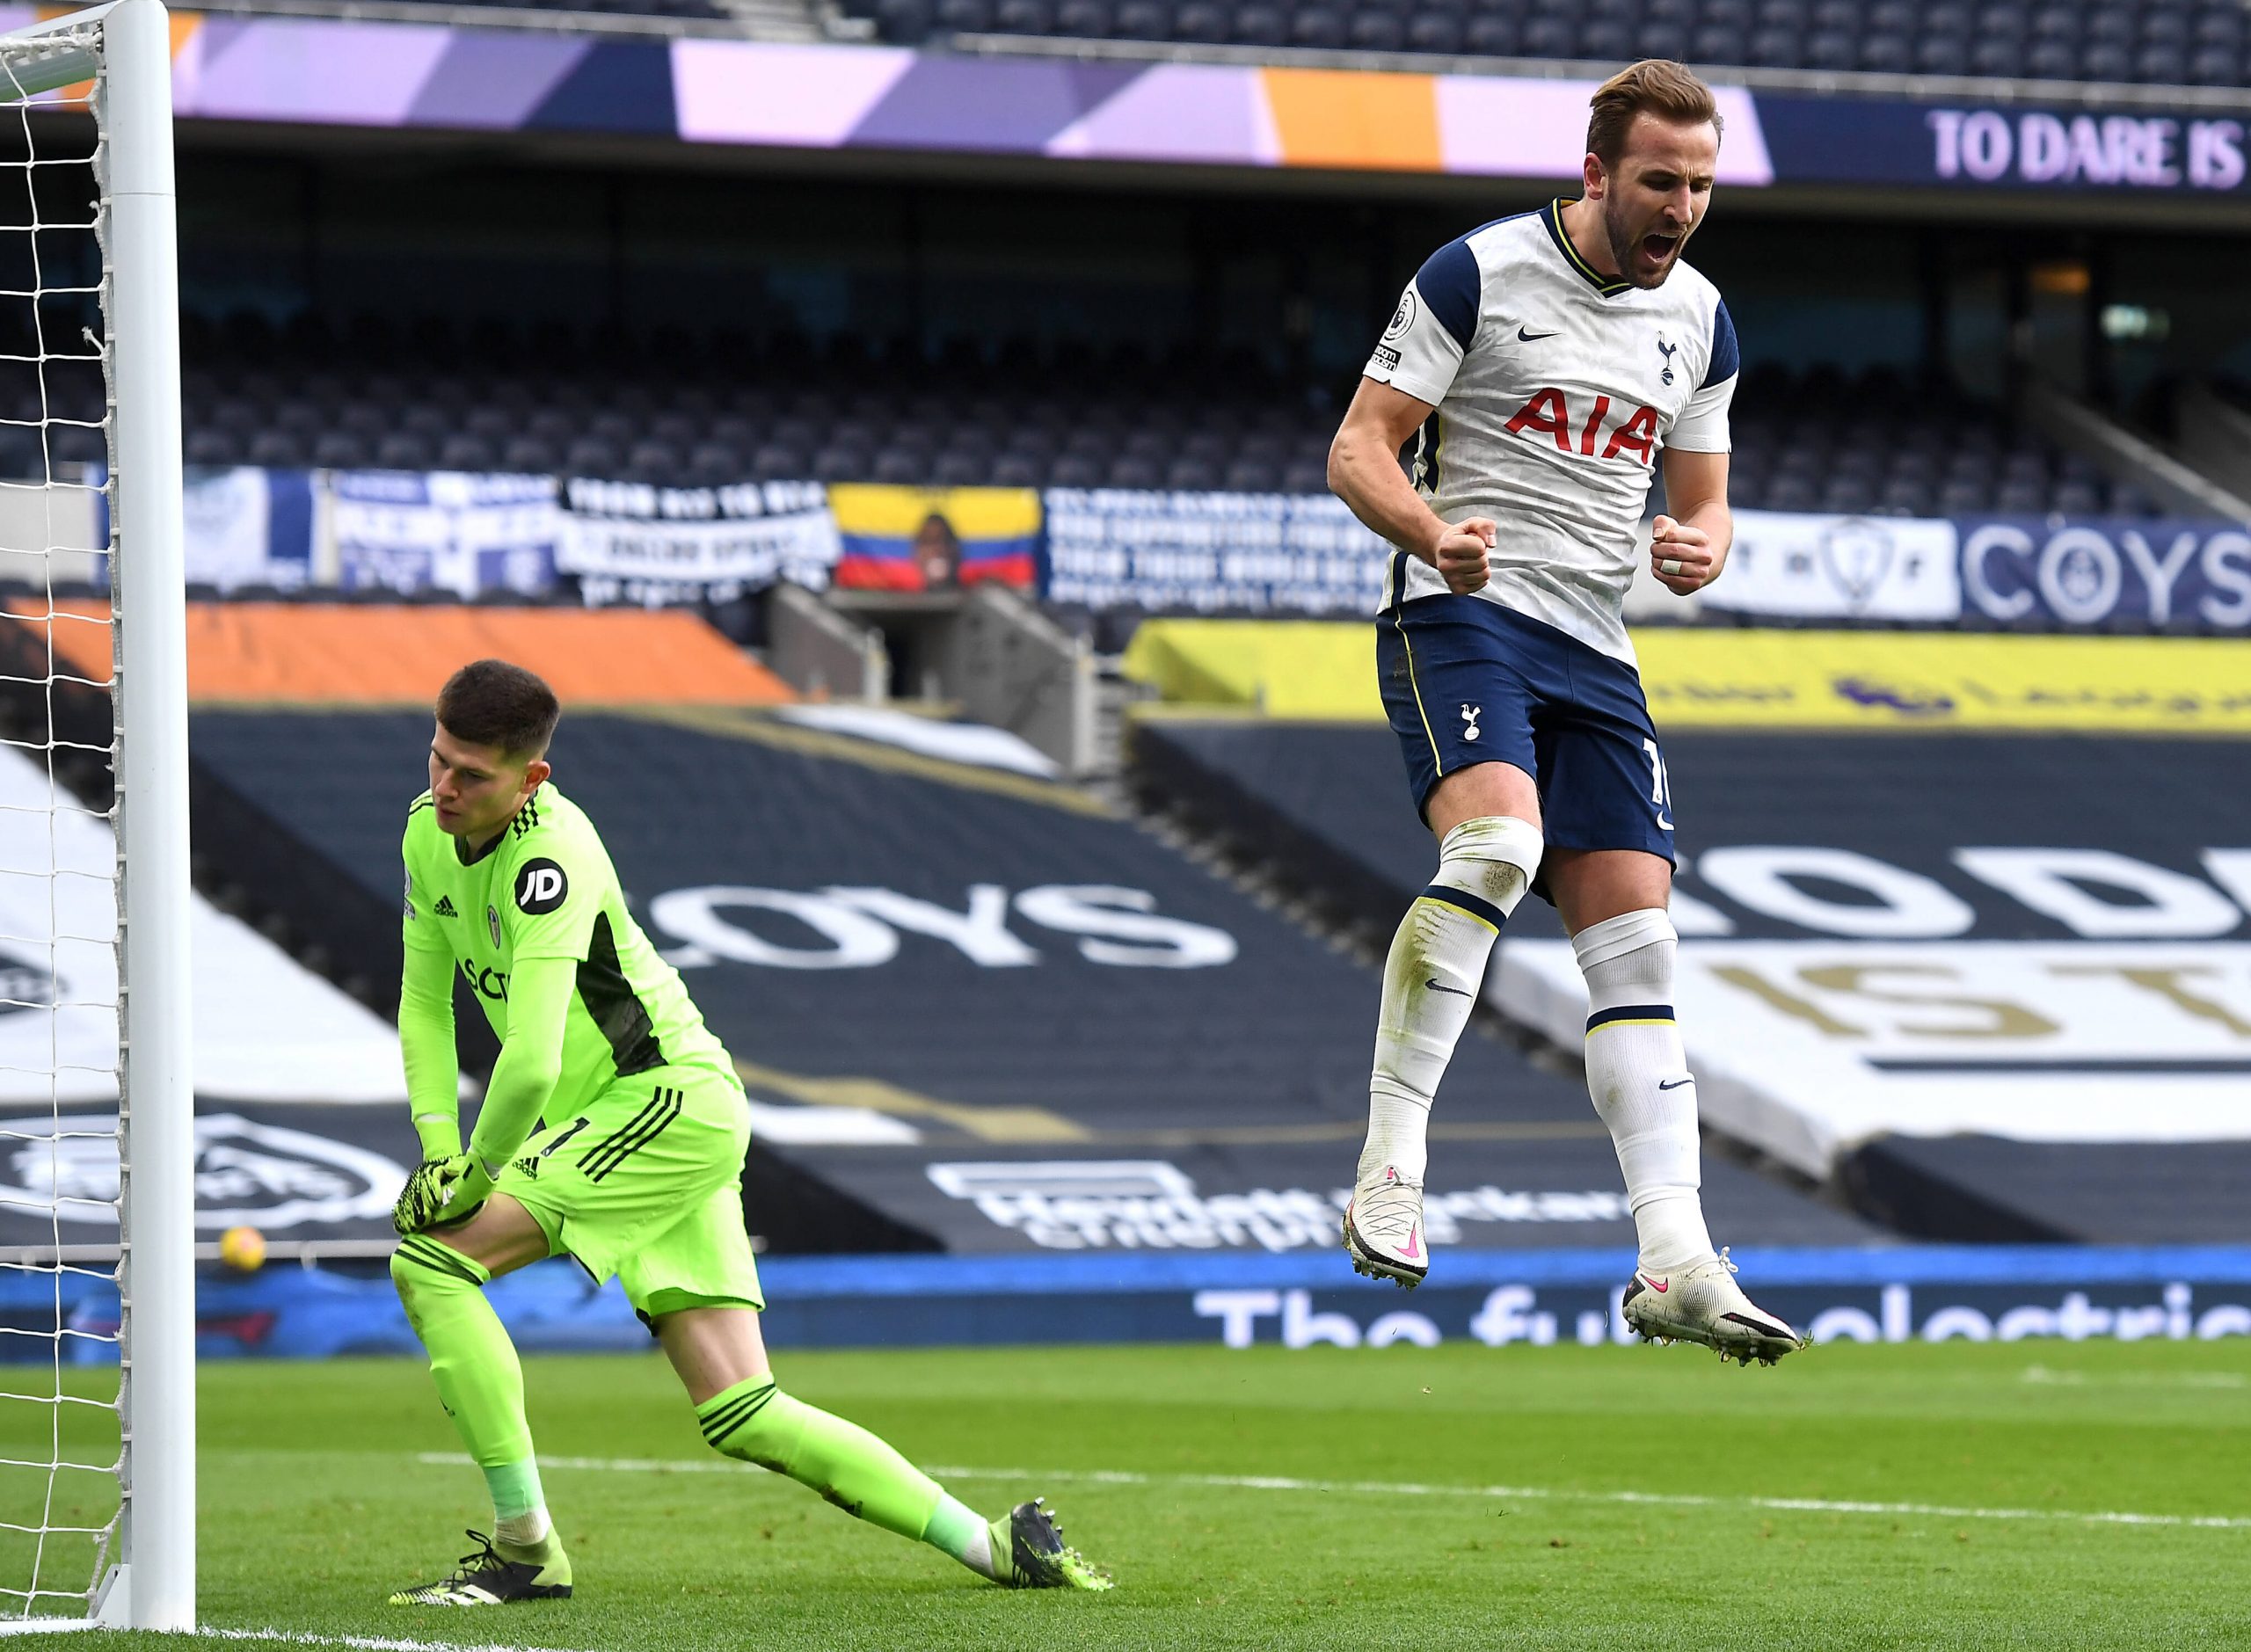 Tottenham Hotspur Players Rated In Win Over Leeds United (Harry Kane can be seen in the picture)